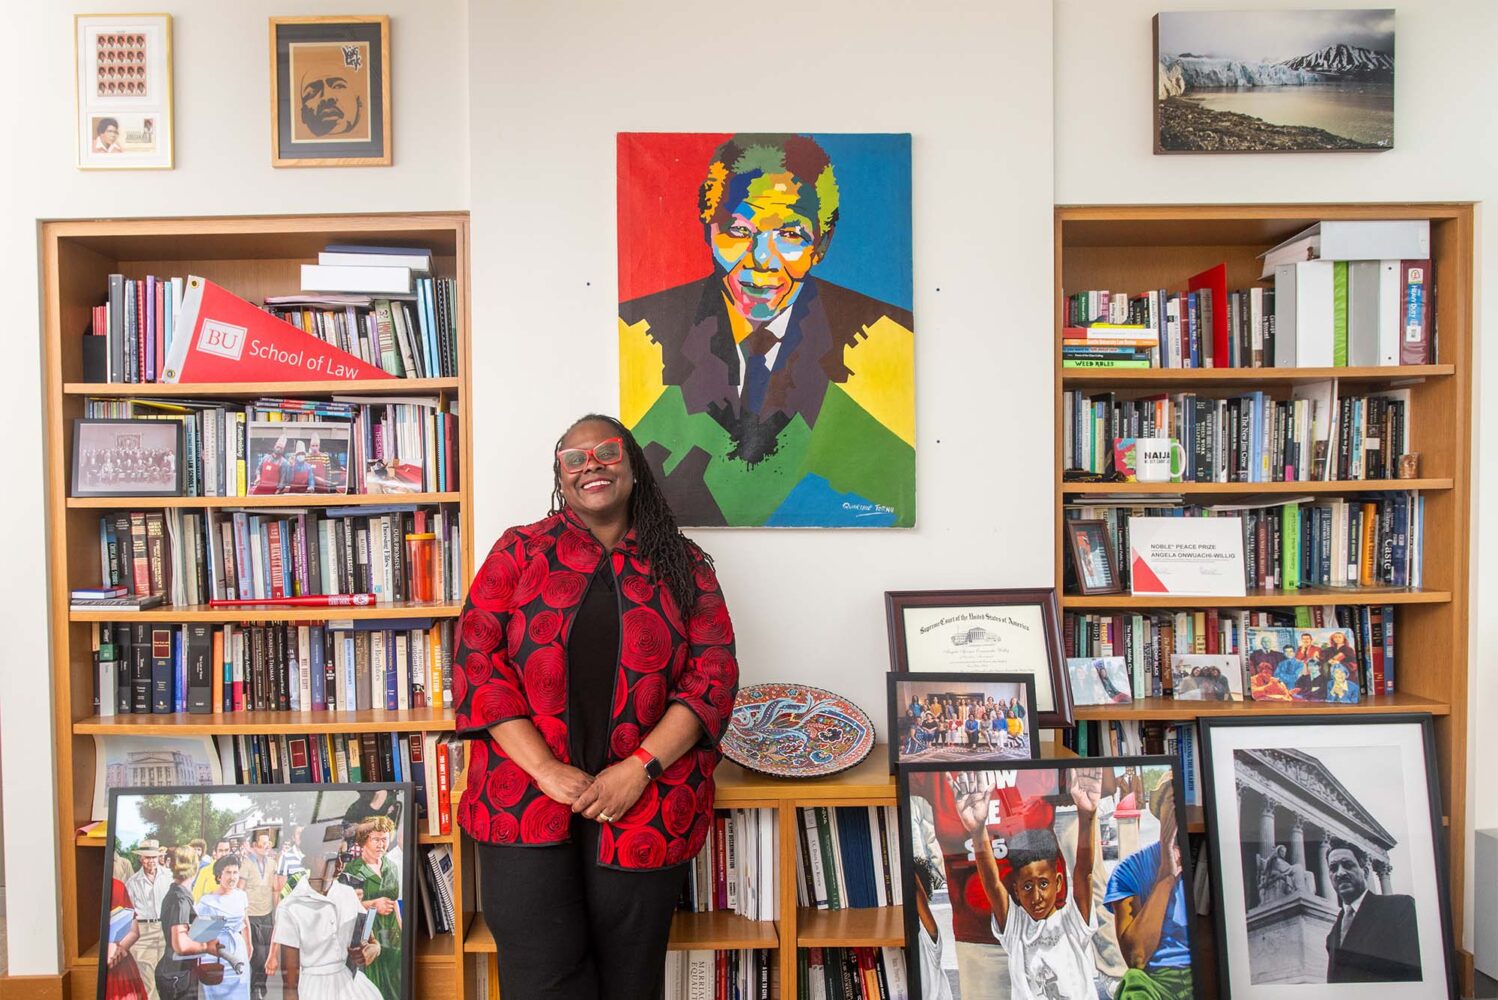 Photo: A black woman wearing a colorful cardigan in front of a wall of bookcases and art